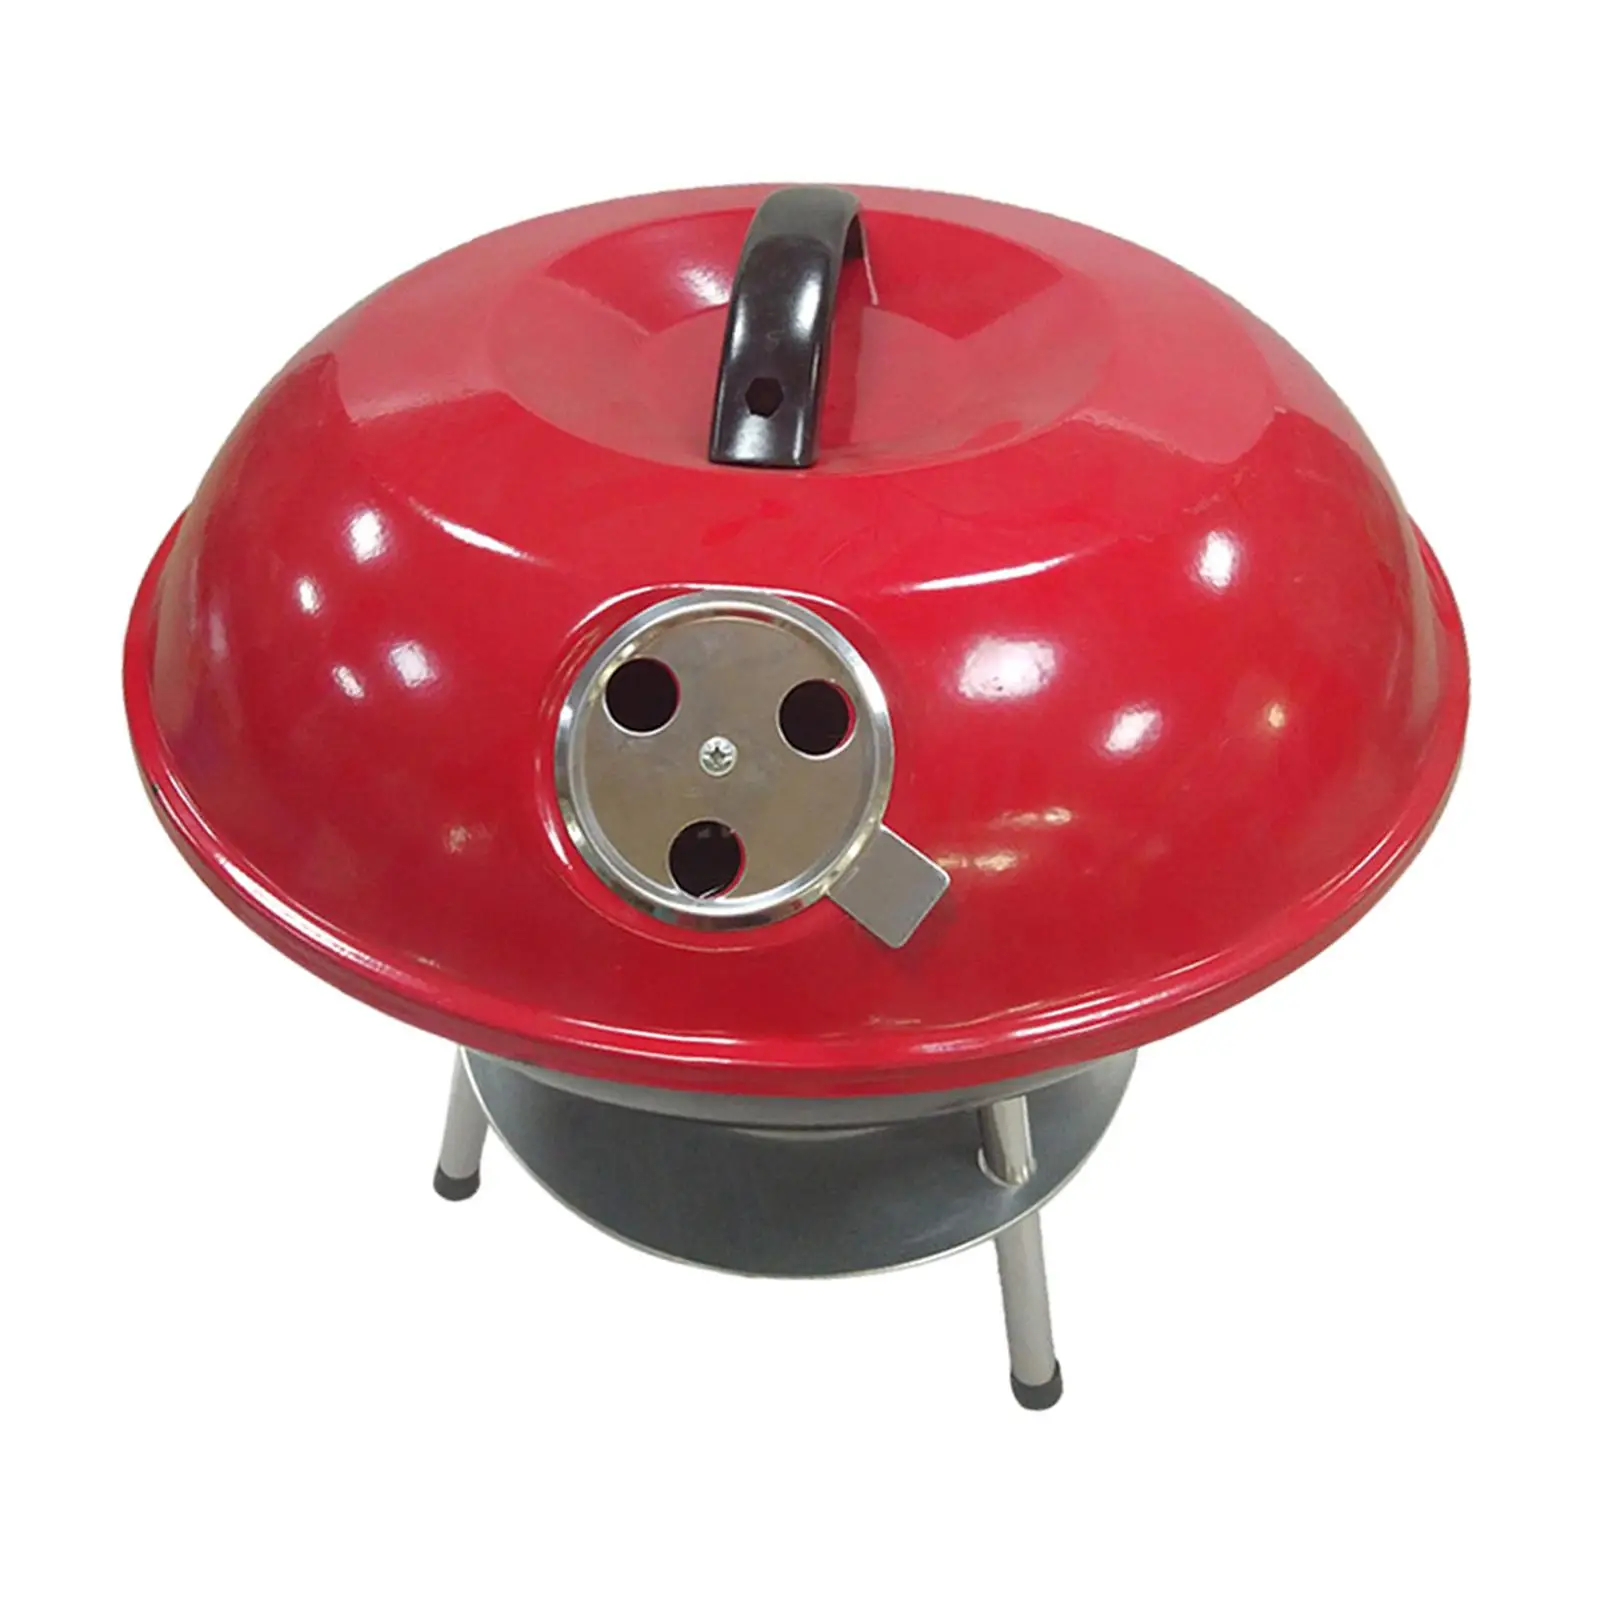 BBQ Grill Apple Shape Charcoal Stove for Outdoor Grilling Cooking Backyard